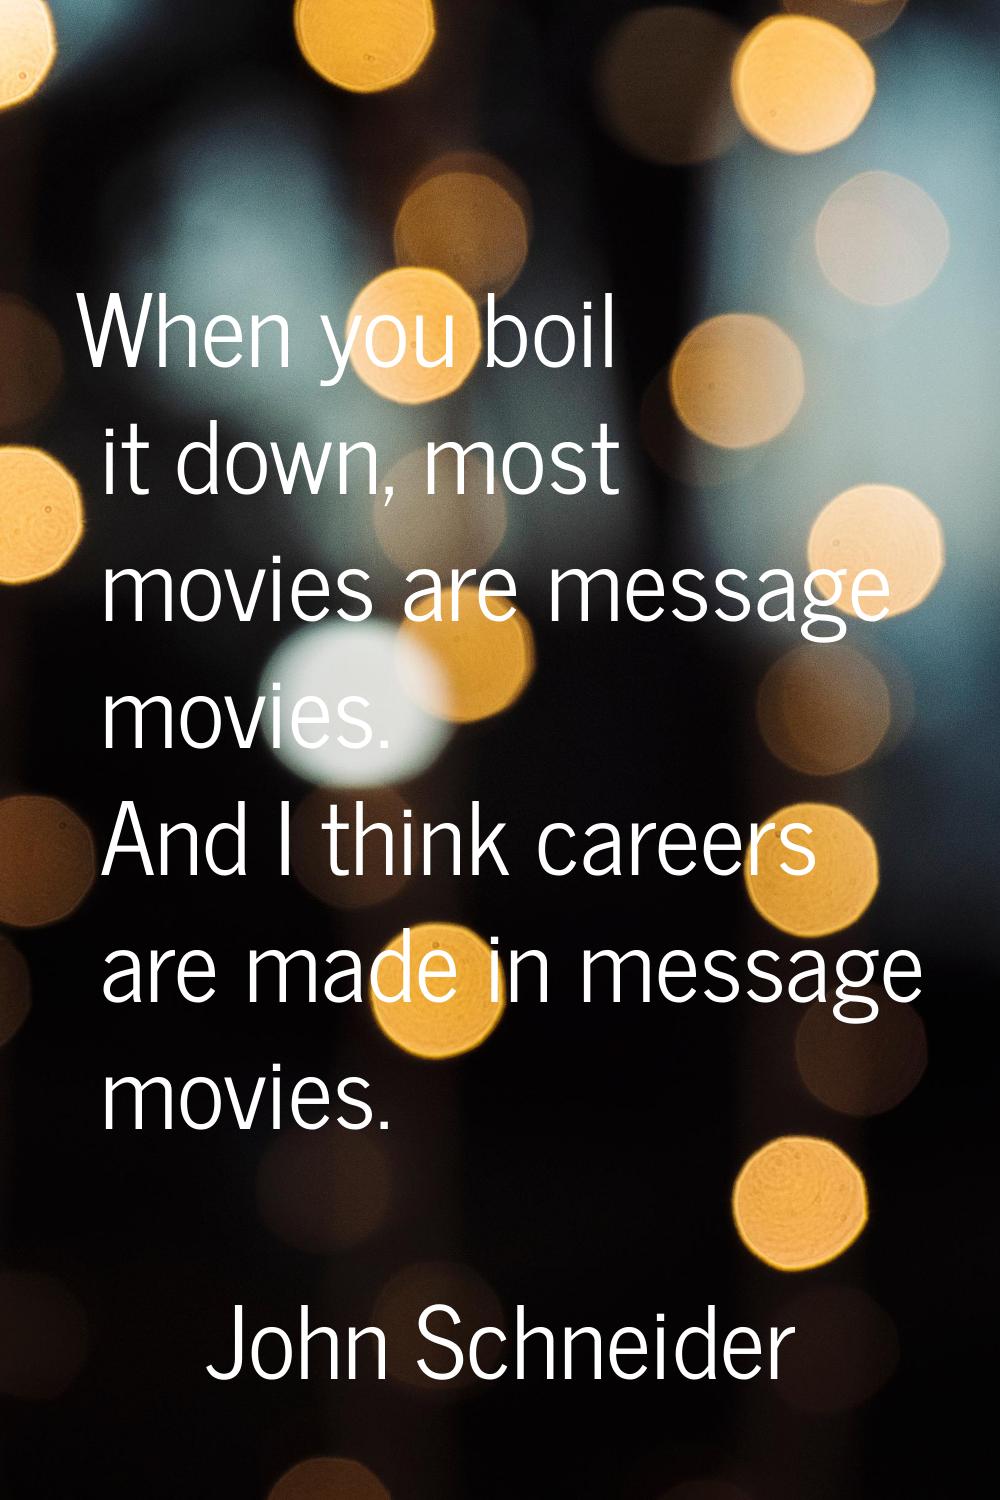 When you boil it down, most movies are message movies. And I think careers are made in message movi